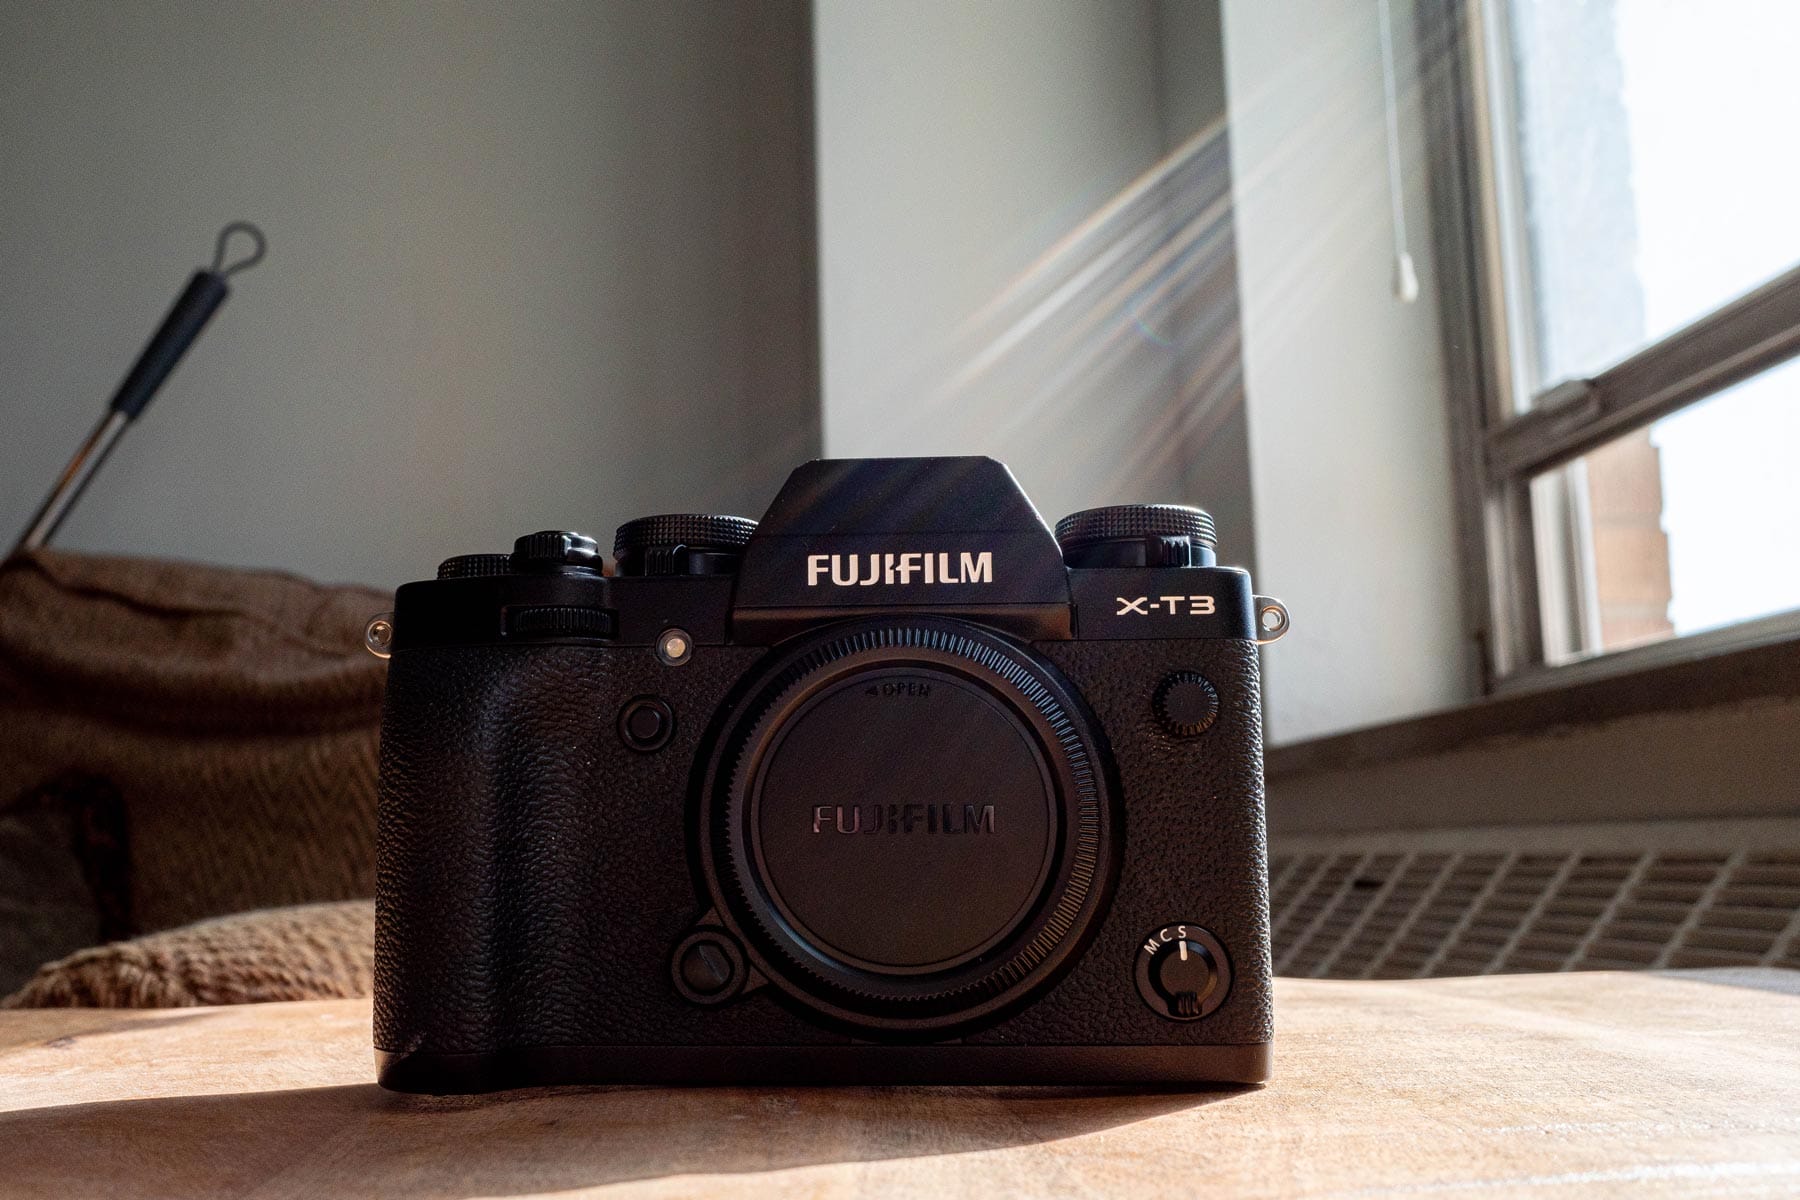 Image of the Fujifilm X-T3 on a wood table next to a window